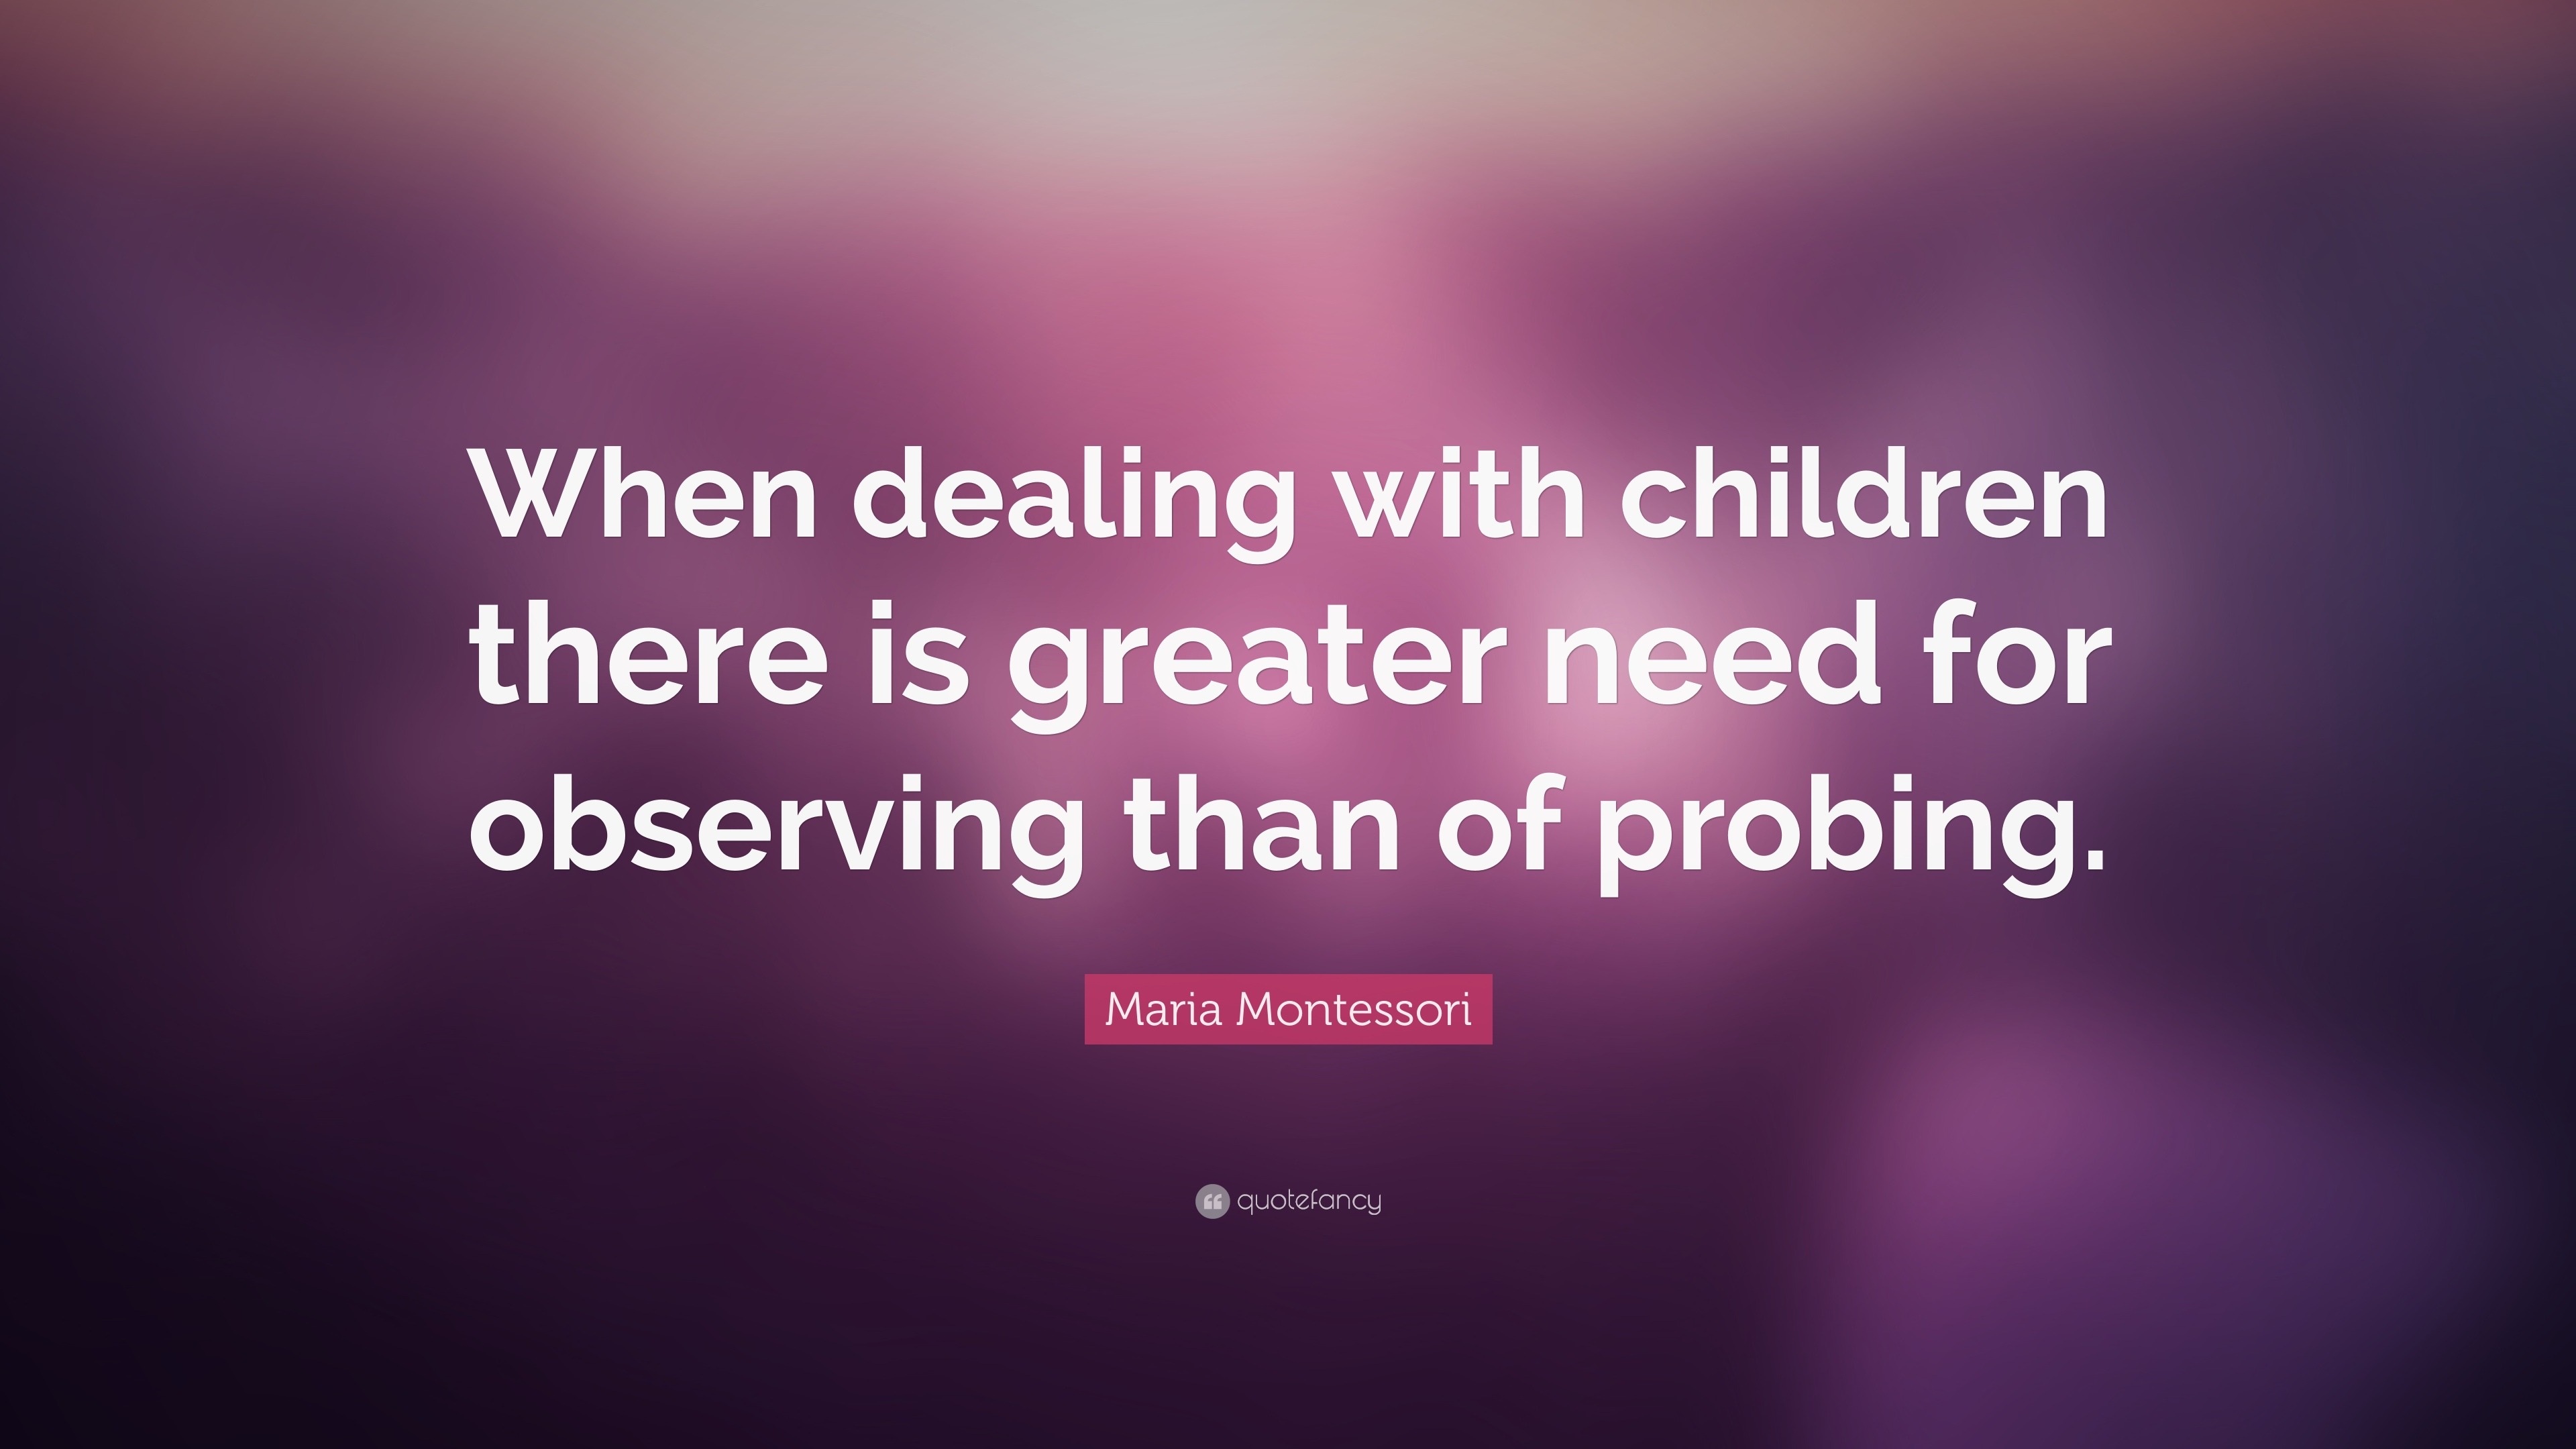 Maria Montessori Quote: “When dealing with children there is greater